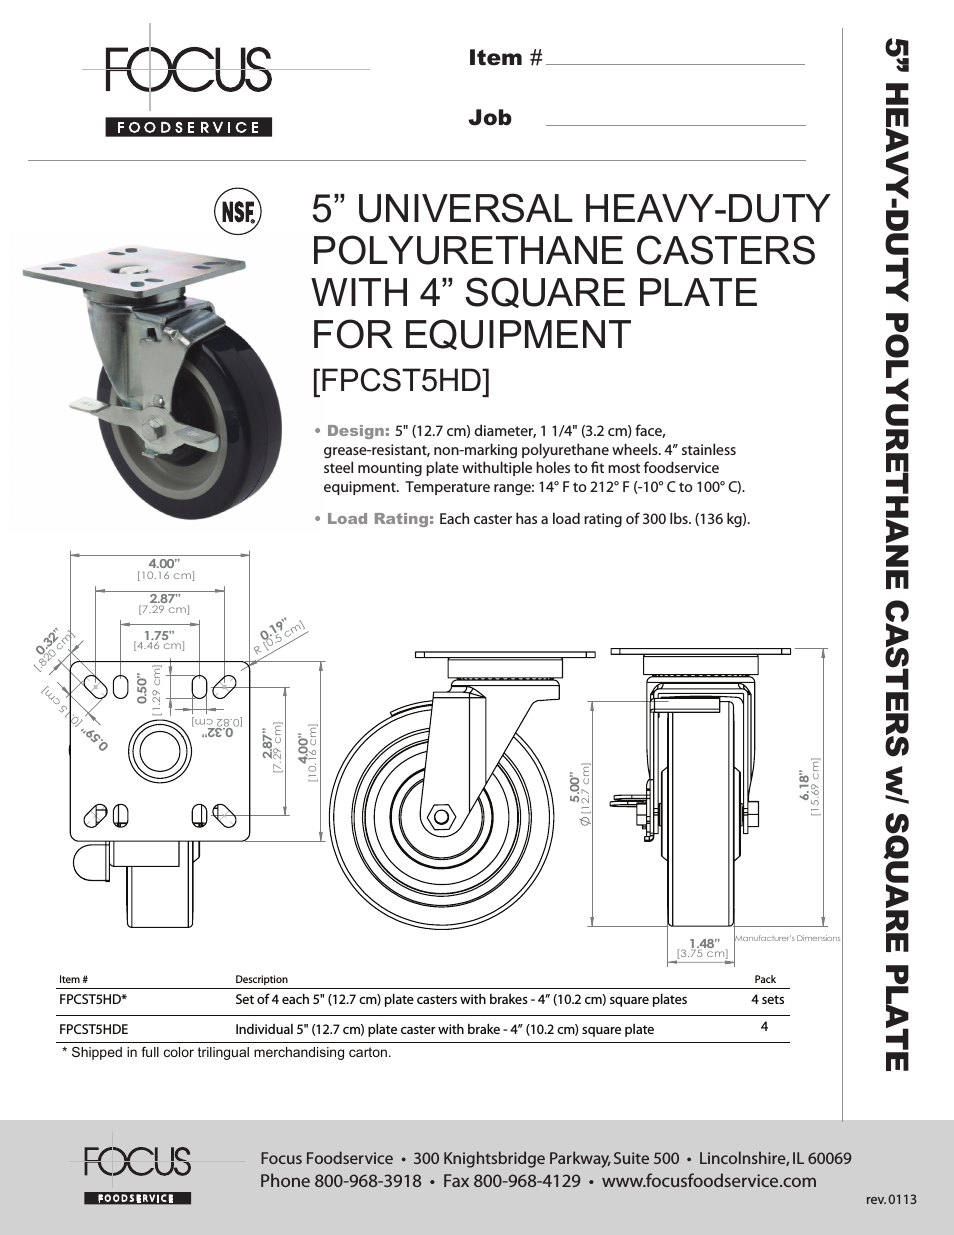 FPCST5HD 5” UNIVERSAL HEAVY-DUTY  POLYURETHANE CASTERS WITH 4” SQUARE PLATE FOR EQUIPMENT - Specification Sheets